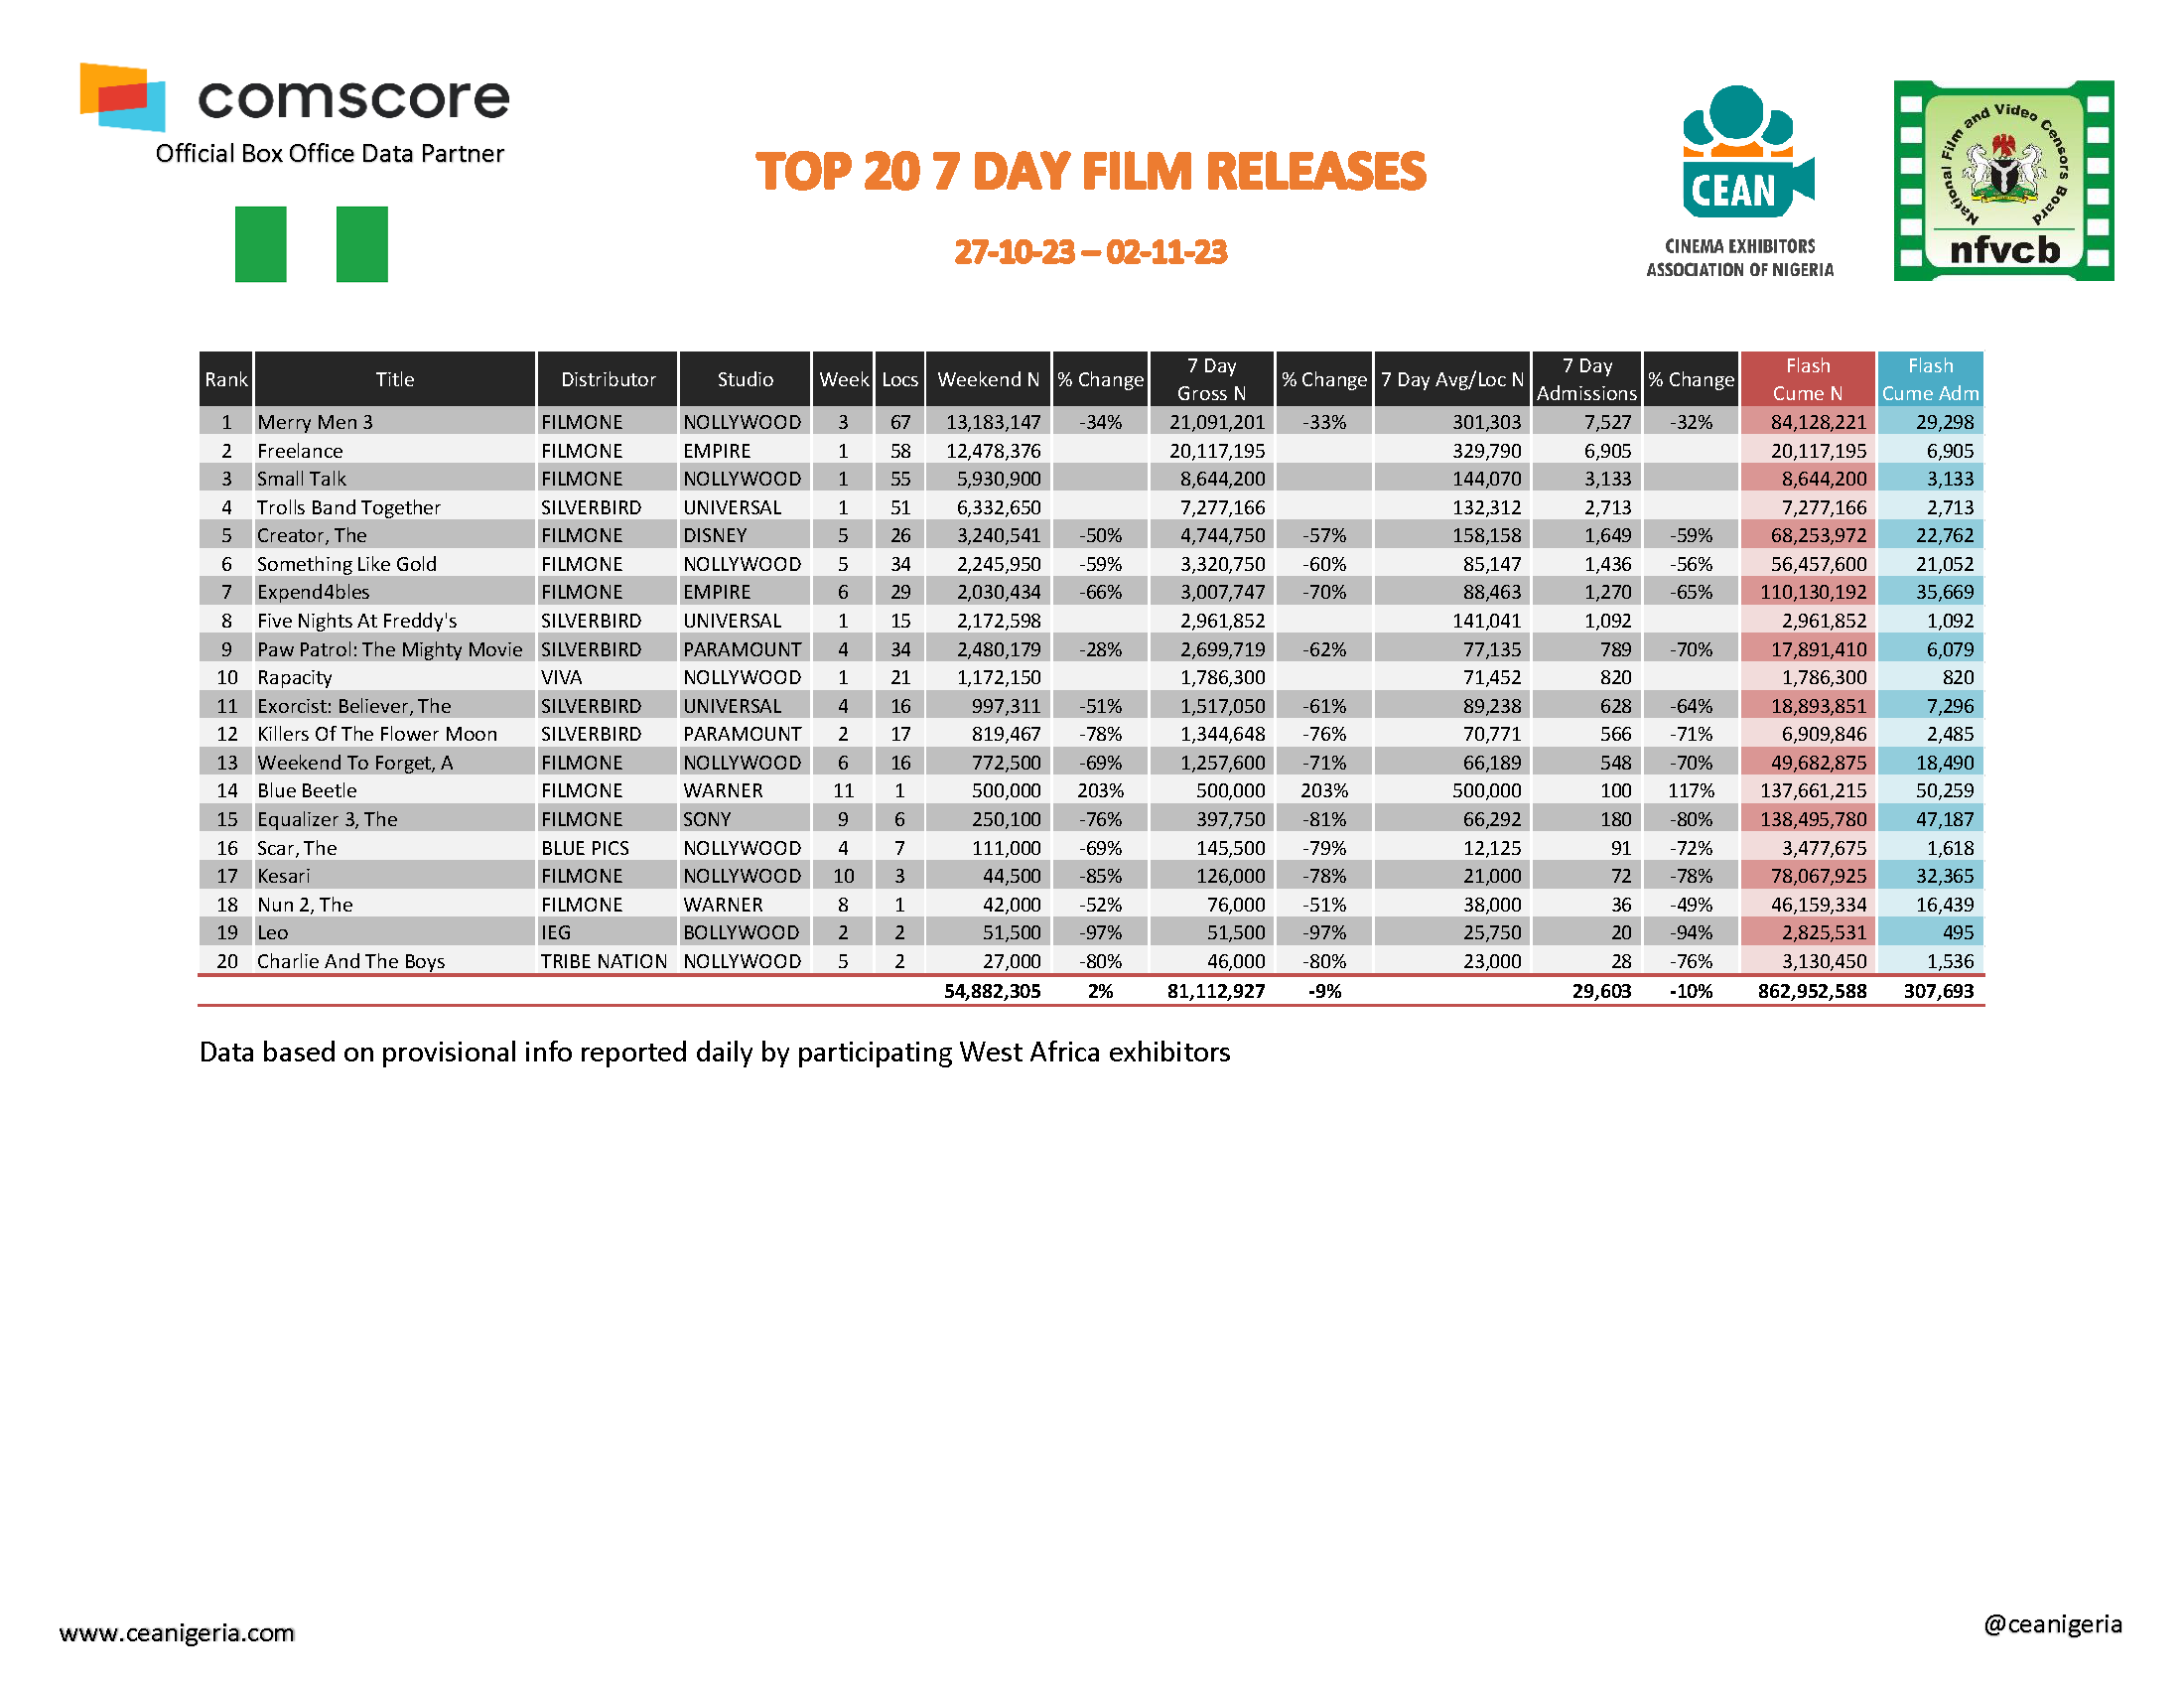 Top 20 films 7 Day 27th October 2nd November